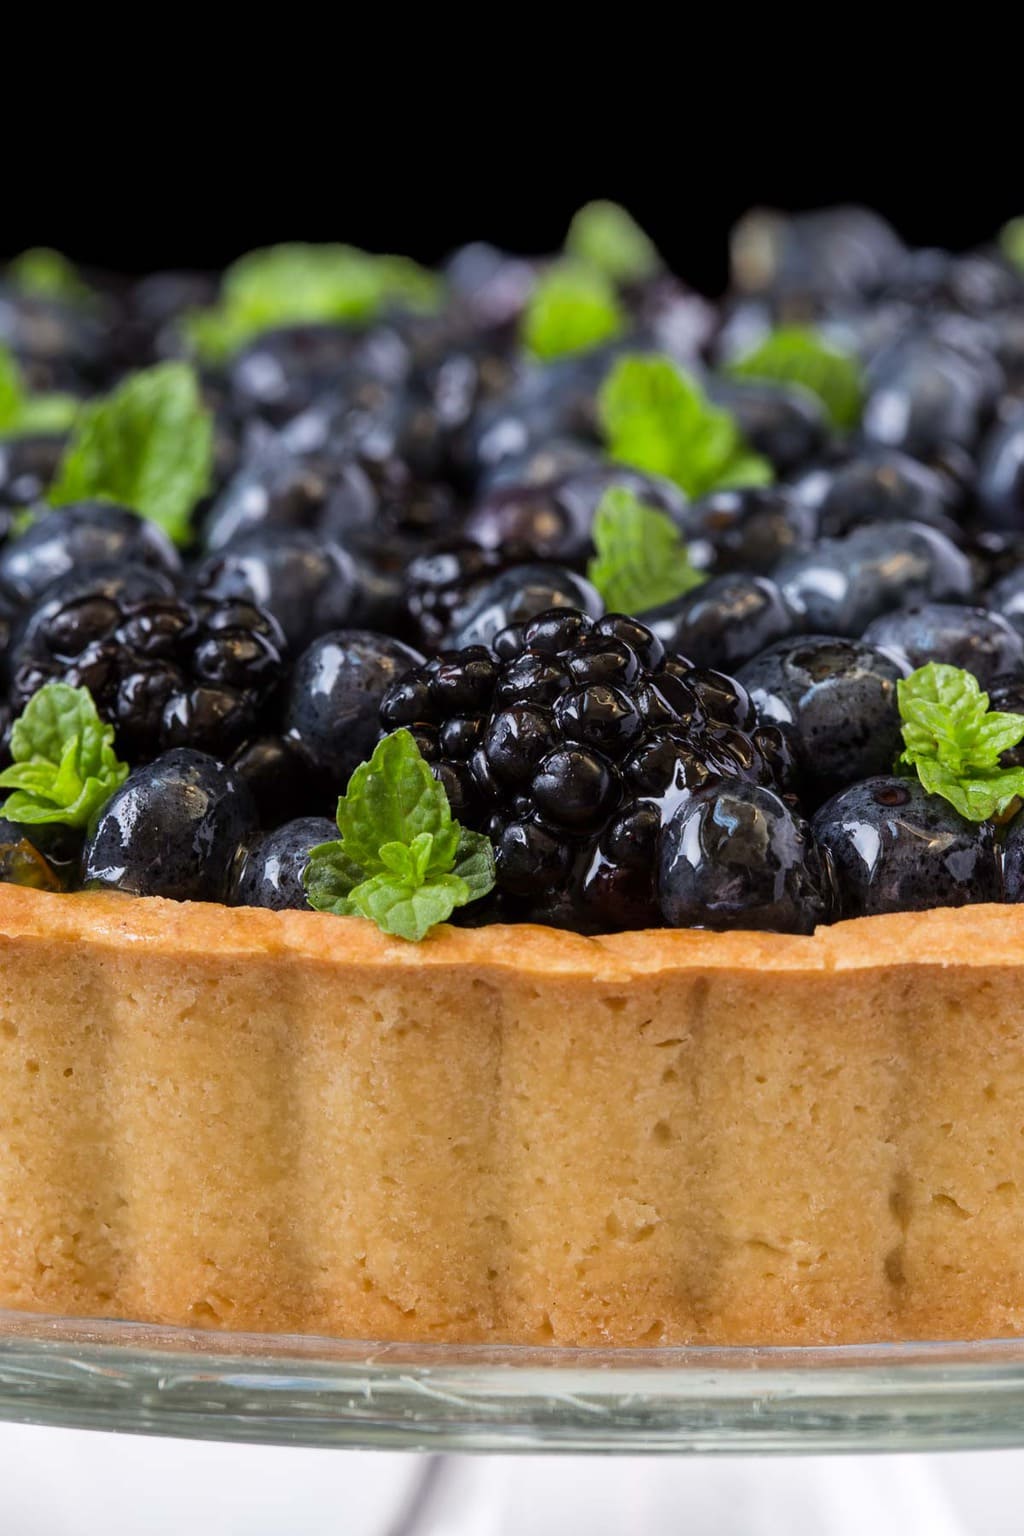 Ultra closeup photo of a Lemon Cheesecake with Glazed Berries, featuring the crust.